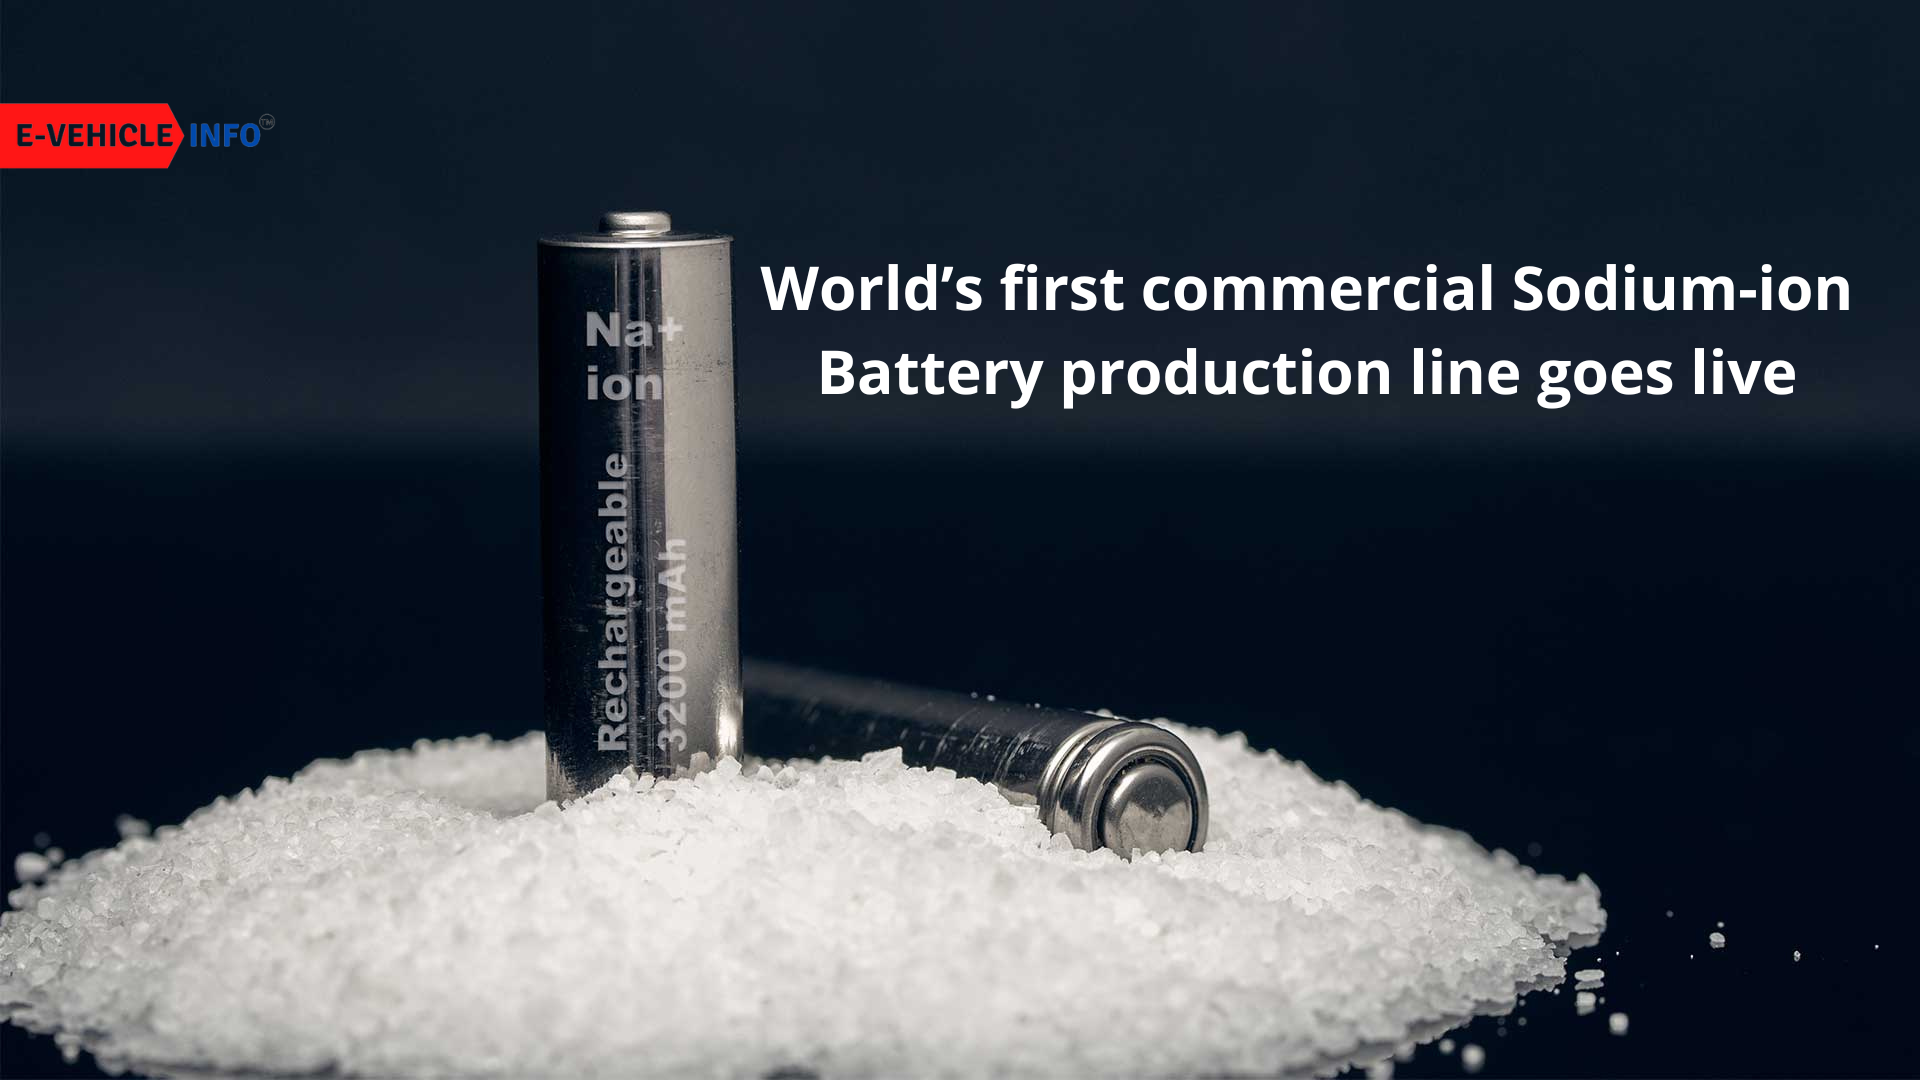 World’s first Commercial Sodium-ion Battery production line goes live